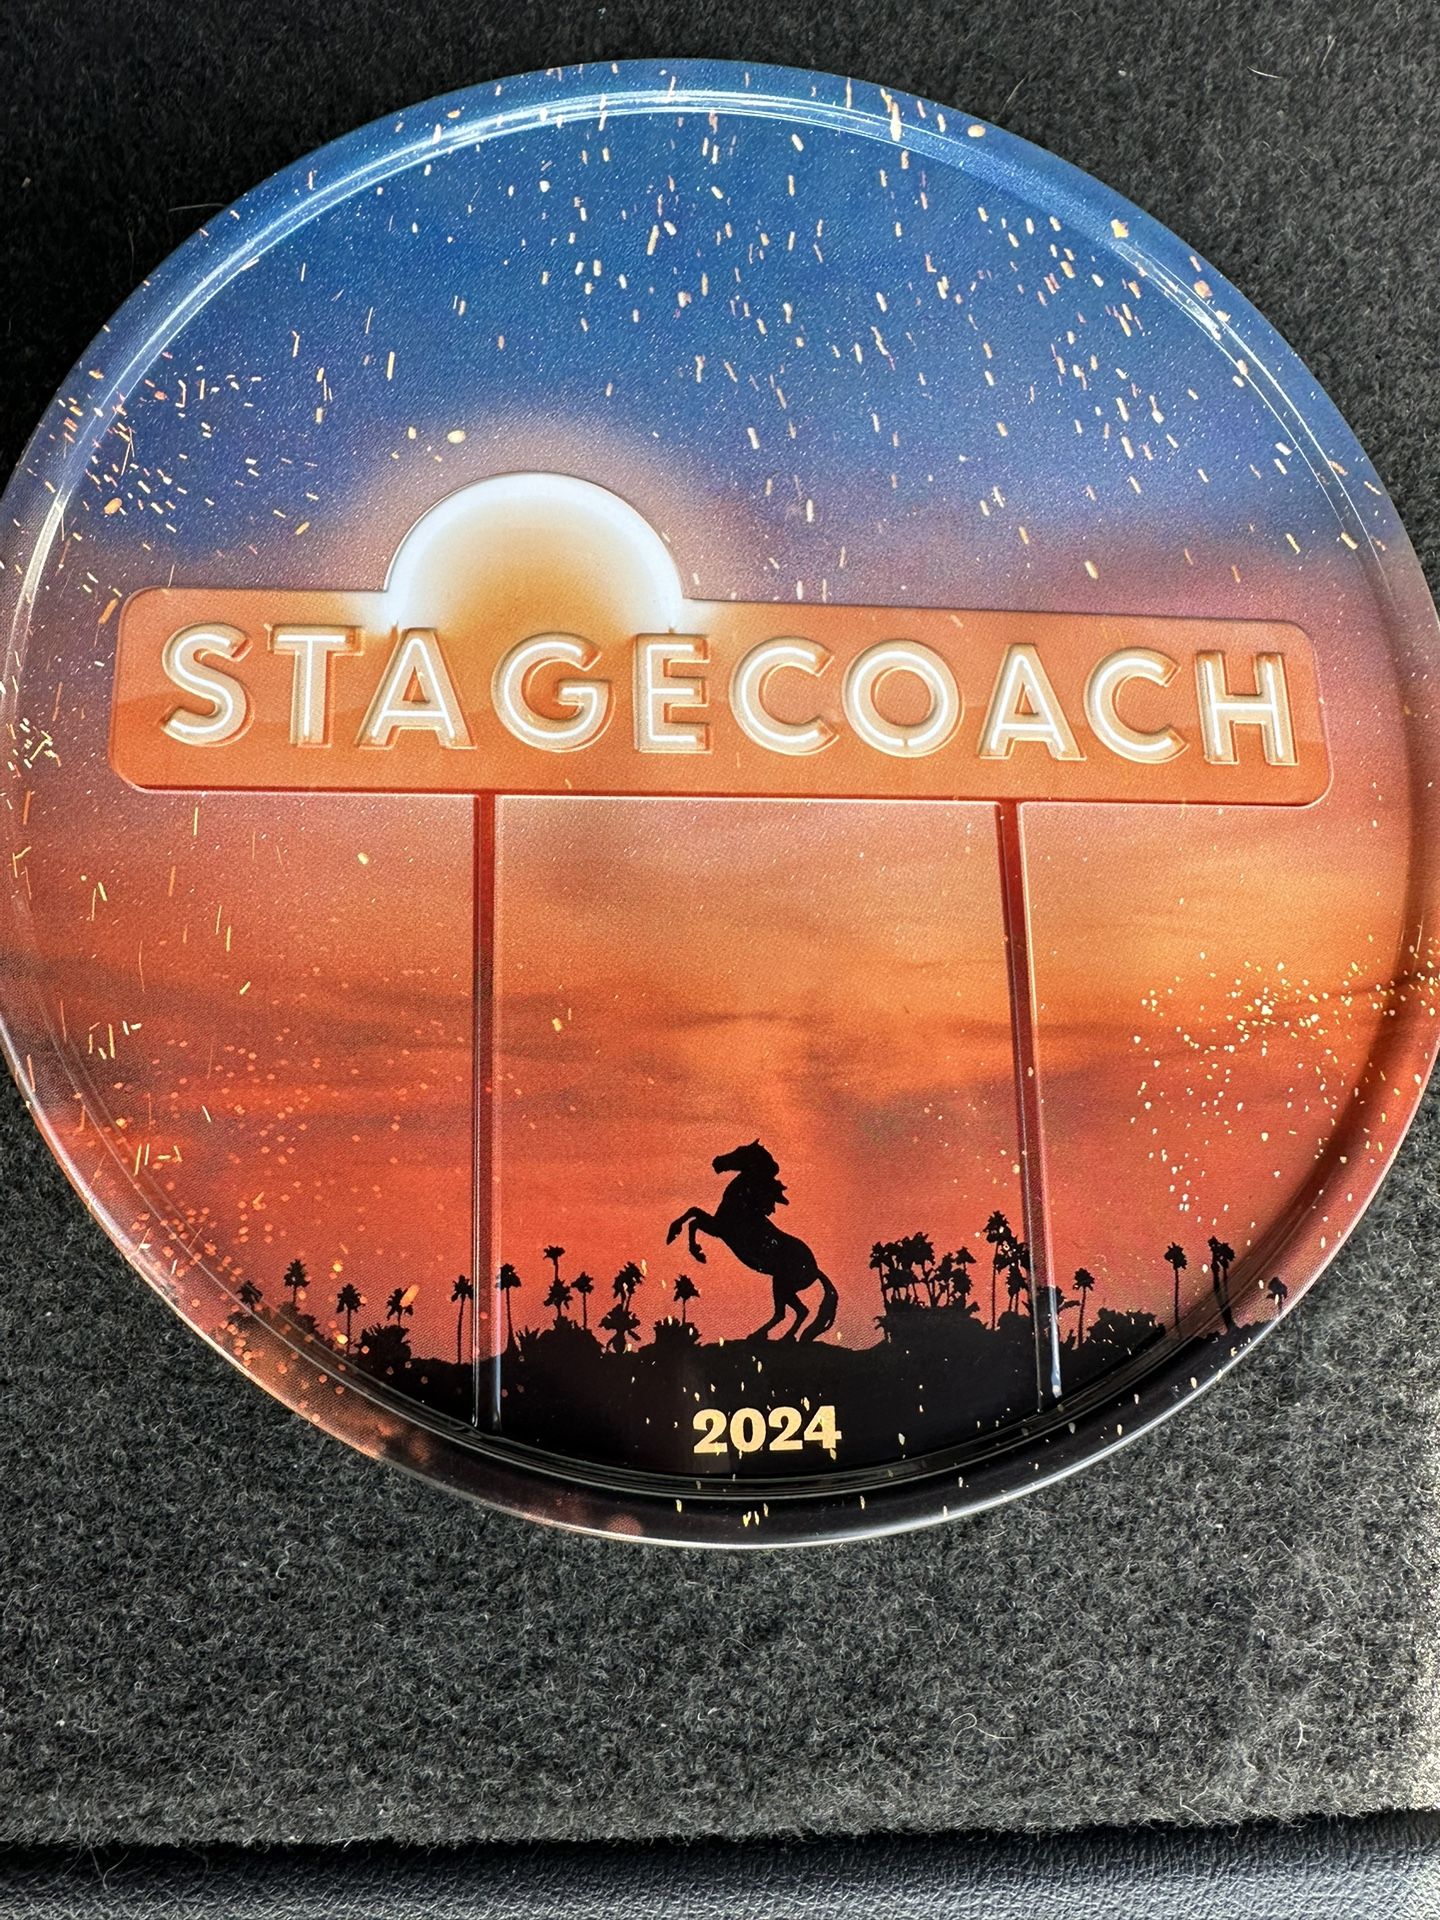 2 Stagecoach 3 Day Passes (ACTUAL SEATS) 